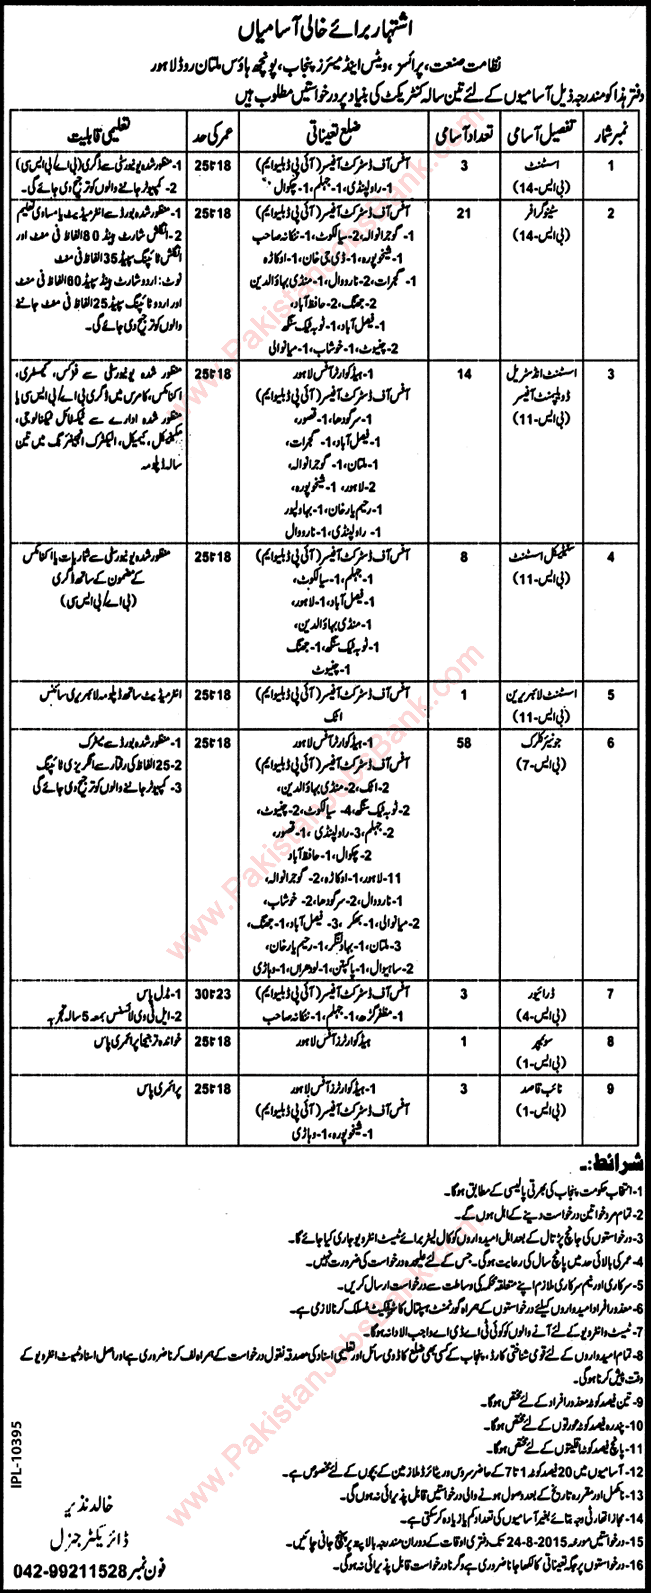 Directorate of Industries Punjab Jobs 2015 August Clerks, Stenographer, Statistical Assistant & Others Latest